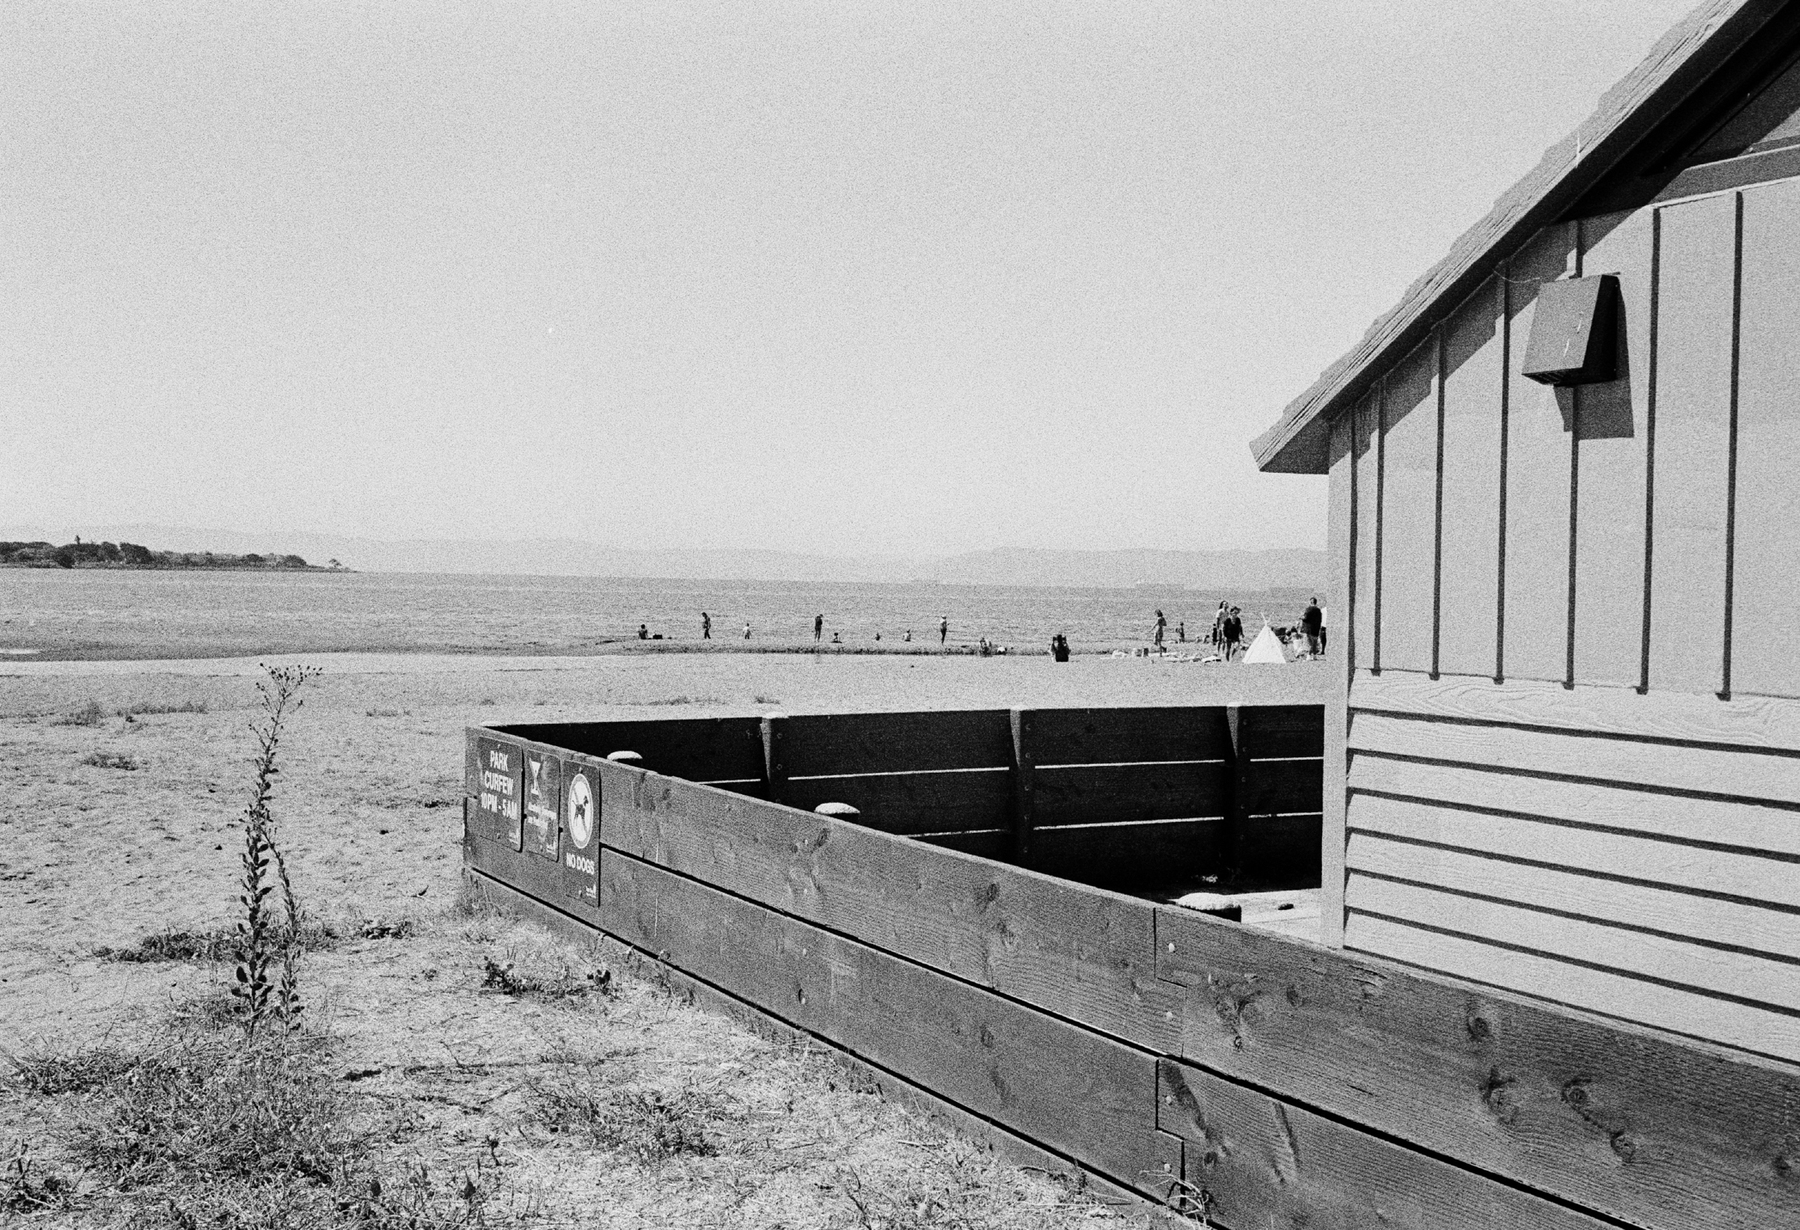 a scan of a black and white photo showing a beach hut on a beach in Alameda, California